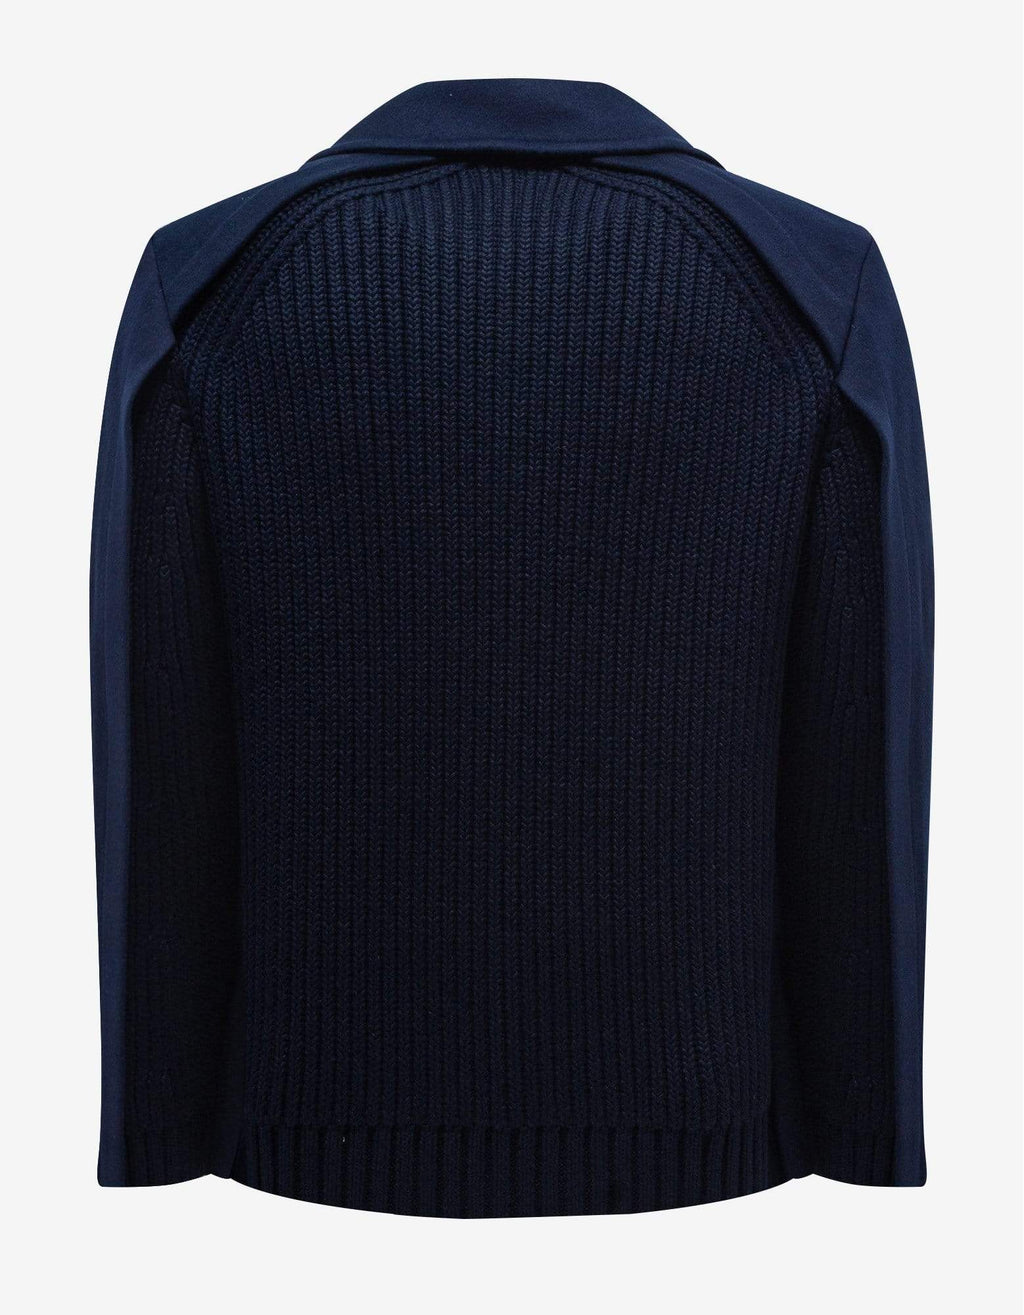 Valentino Navy Blue Double-Breasted Wool Jacket